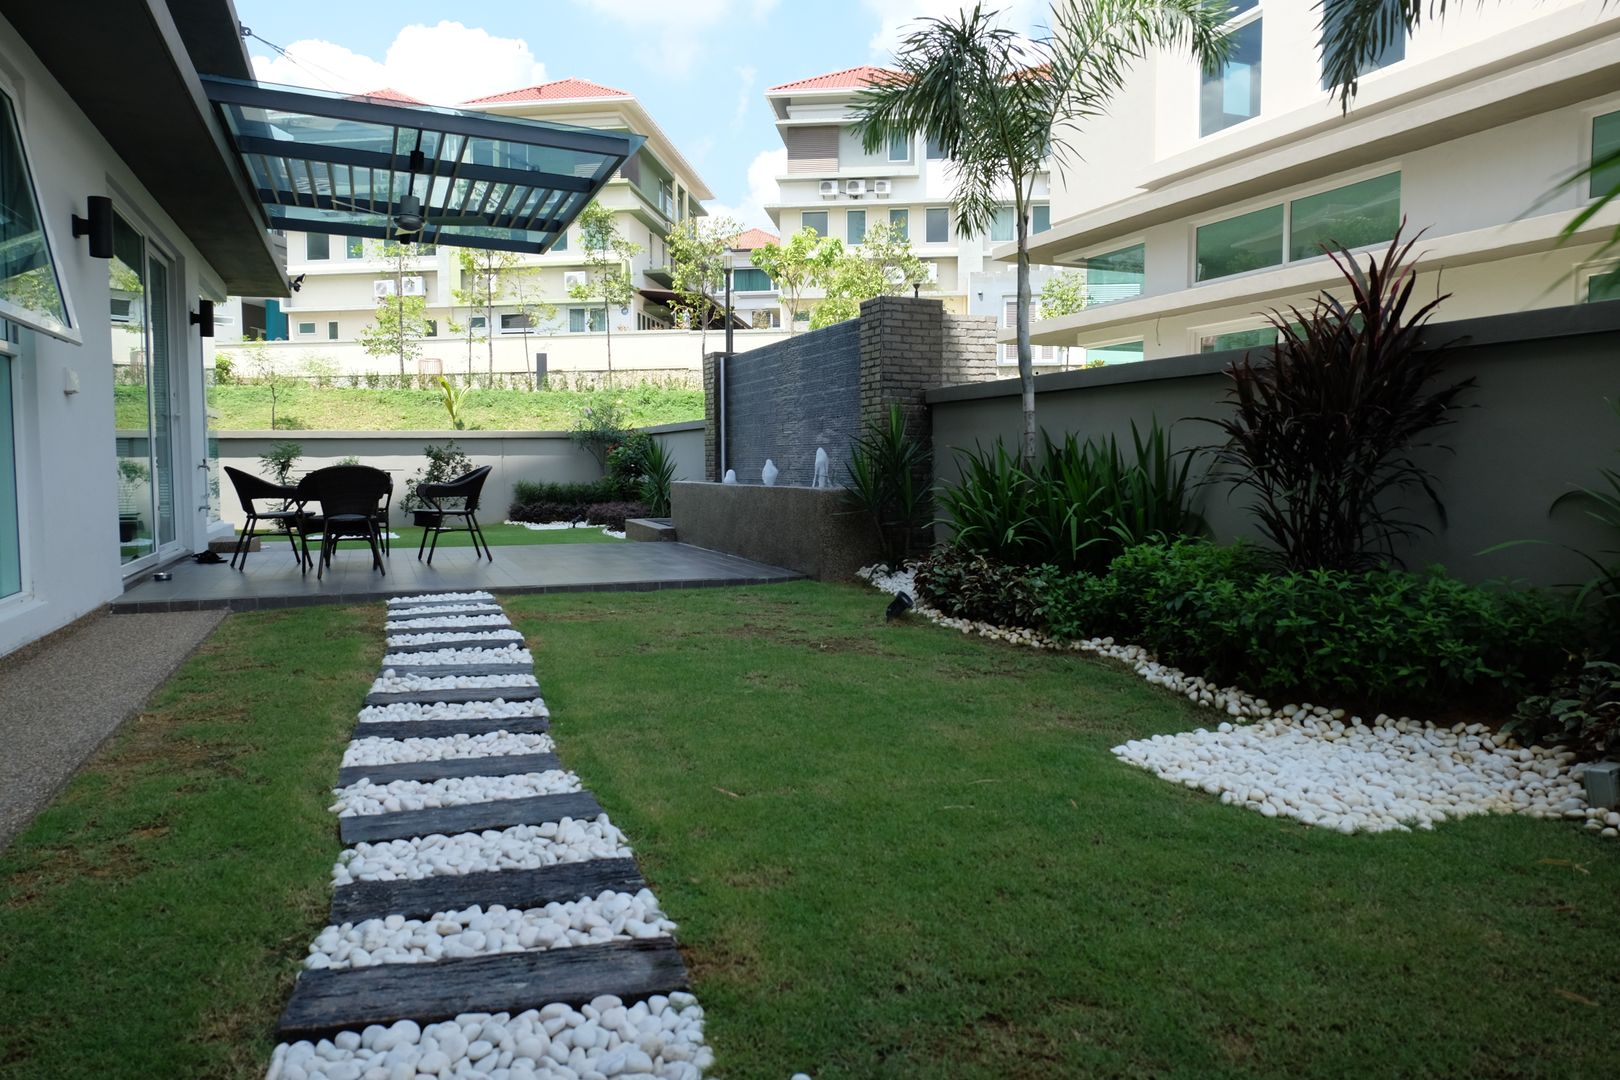 Contemporary Tropical , 3-Storey semi-D, inDfinity Design (M) SDN BHD inDfinity Design (M) SDN BHD 庭院